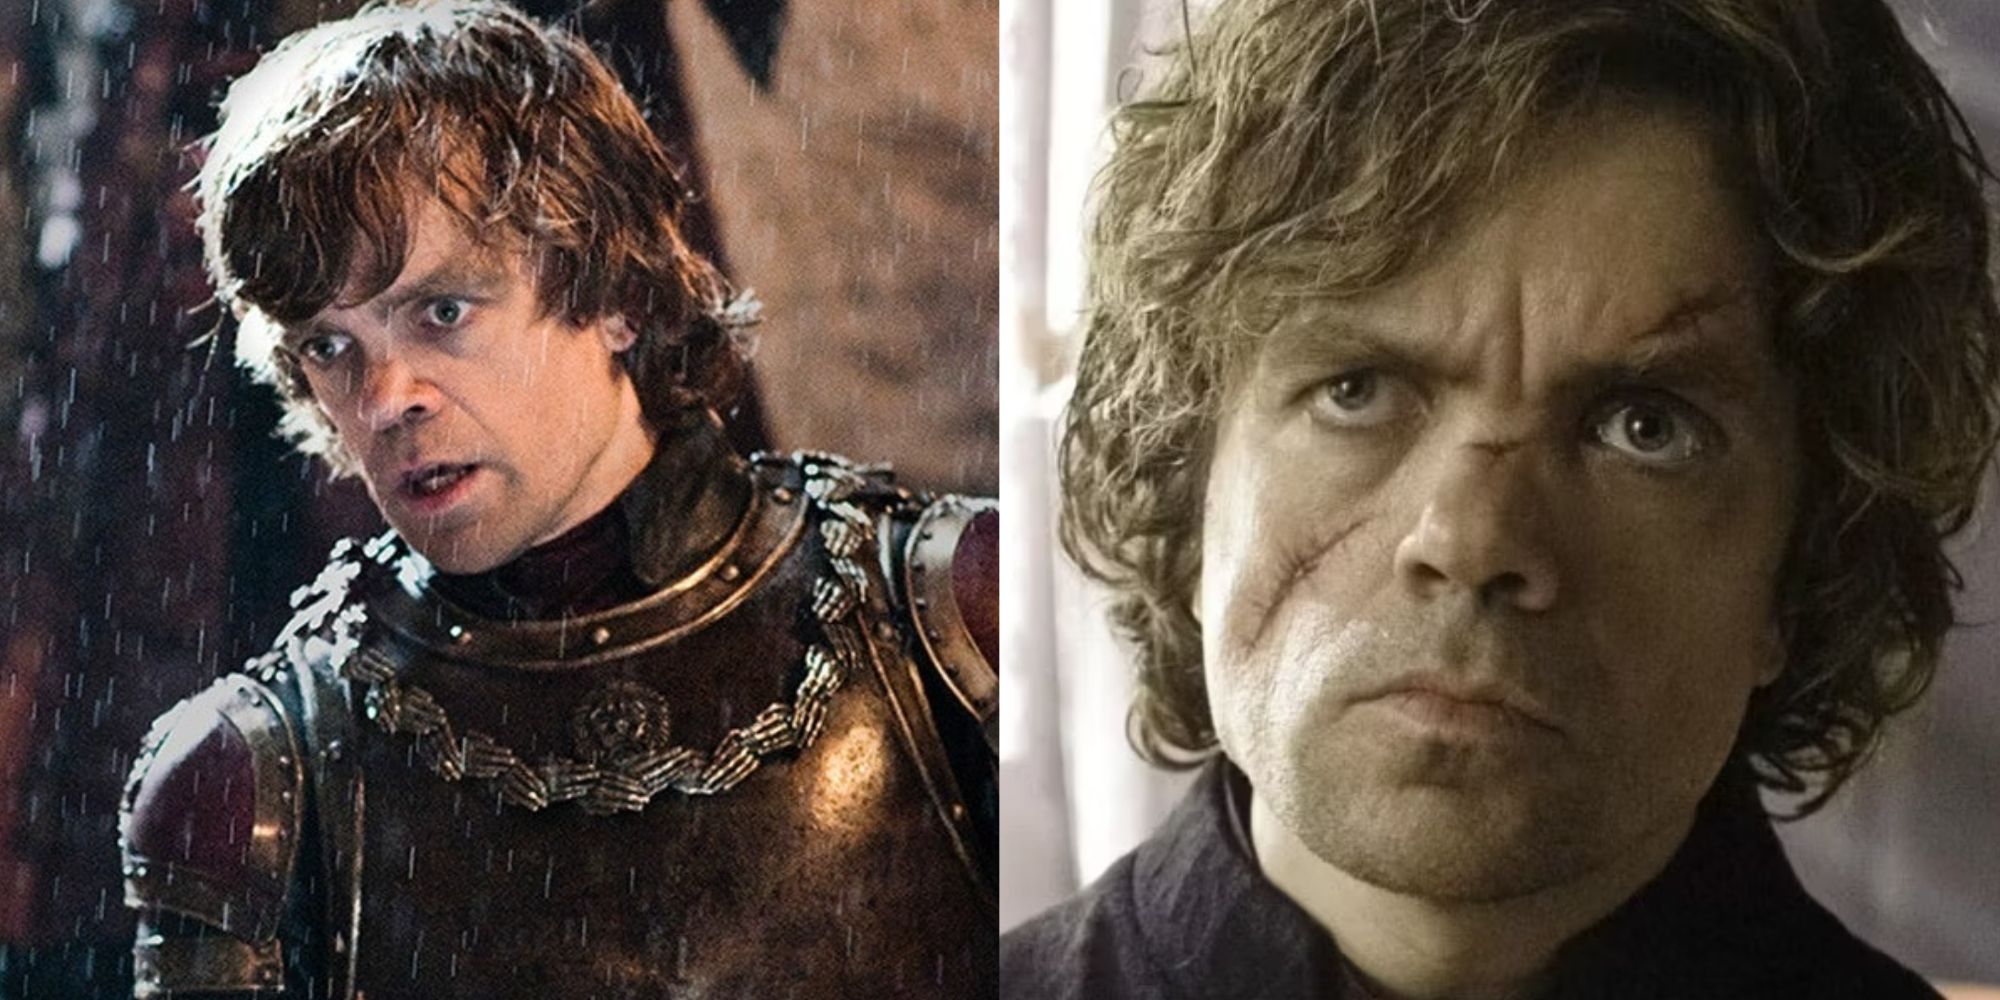 Game Of Thrones: 10 Things From The Books About Tyrion That The Show Changed